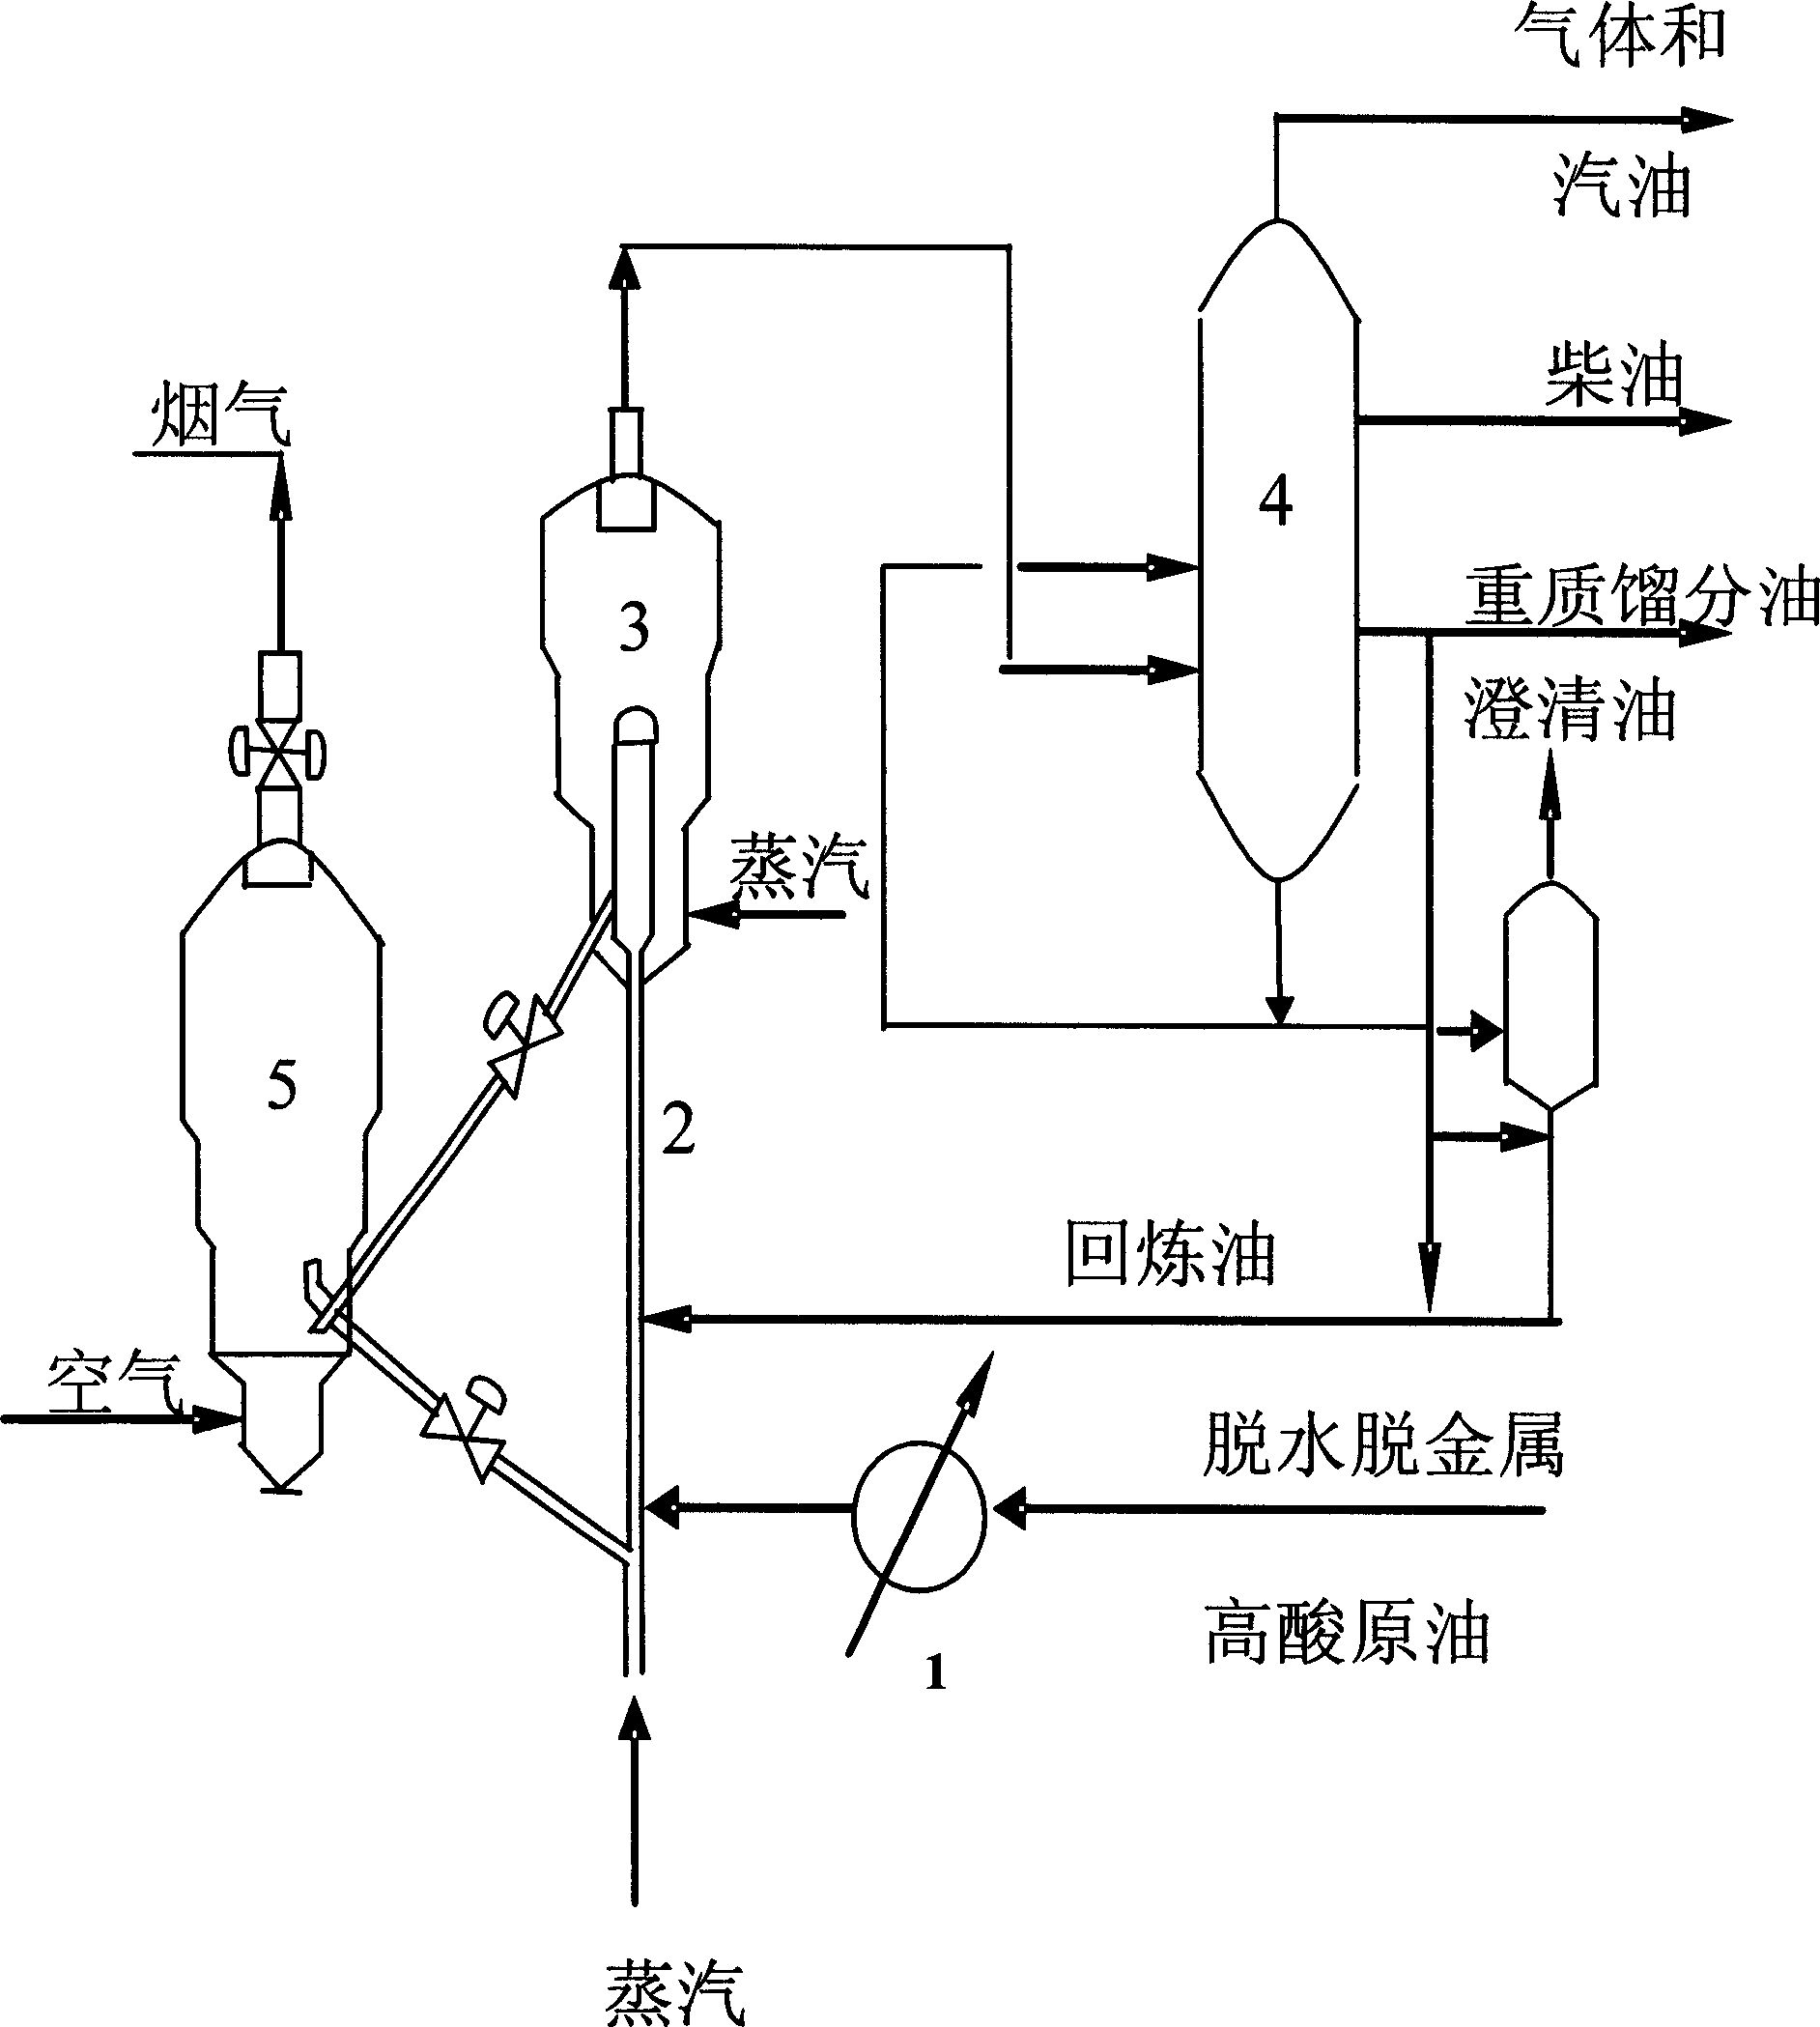 Method for processing crude oil with high acid value